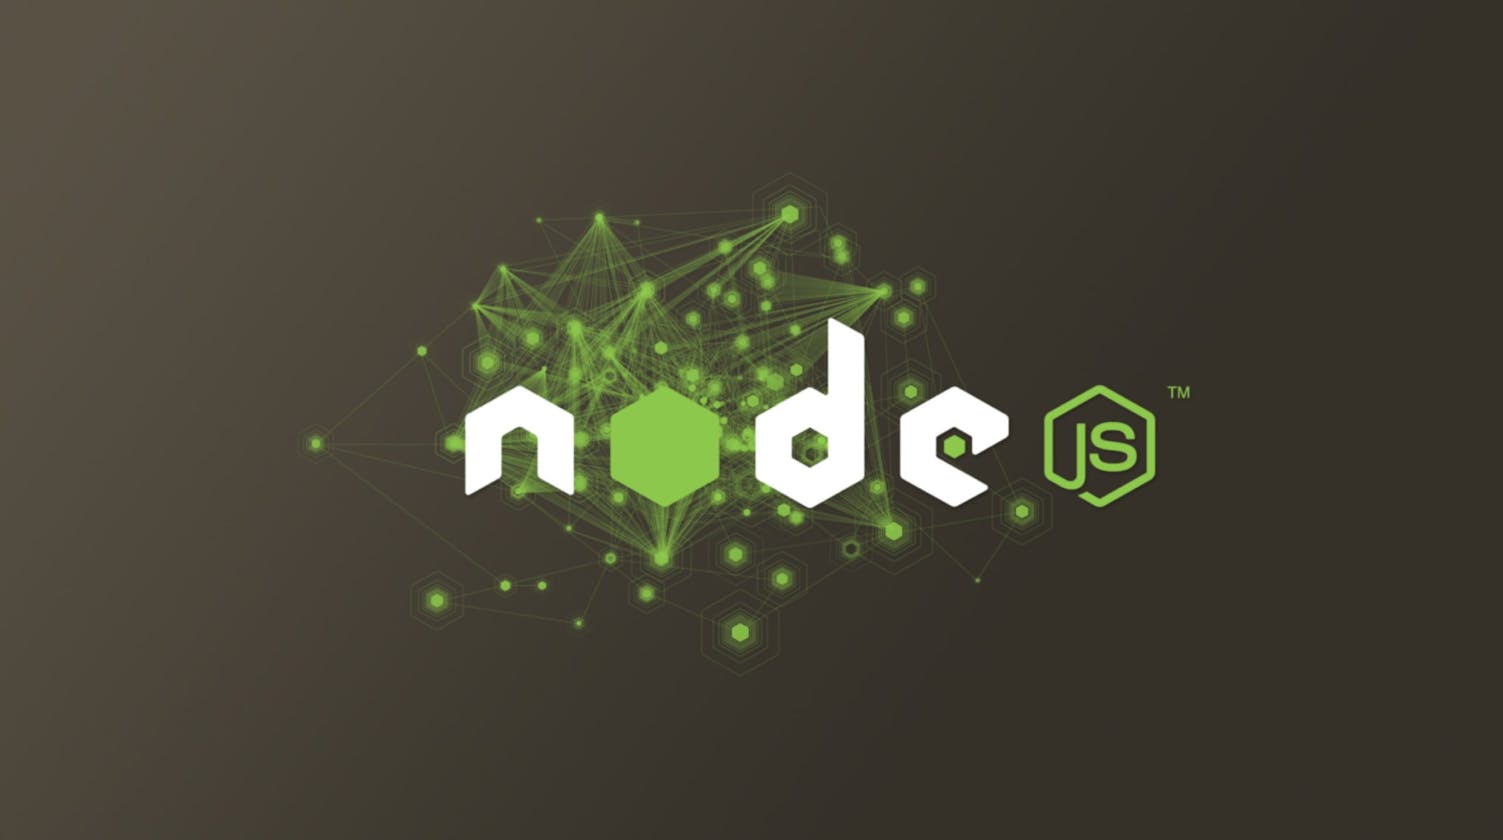 How does Nodejs enable developers to build web applications outside of the browser?